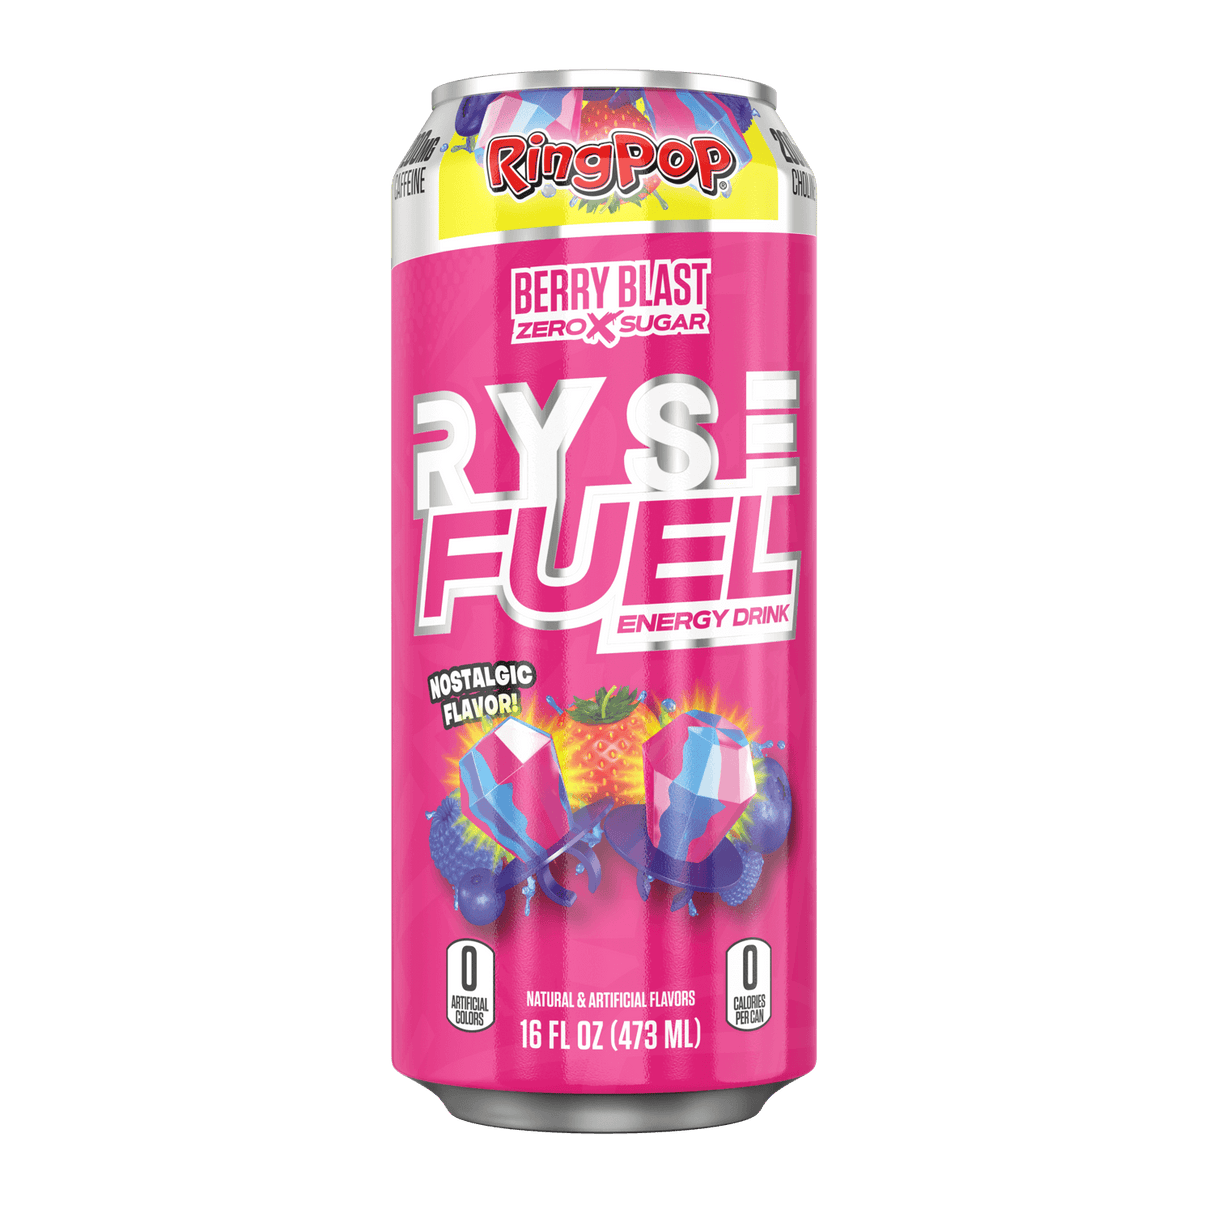 RYSE fuel energy drink - RYSE - Bakersfield POS ONLY - Prime Sports Nutrition